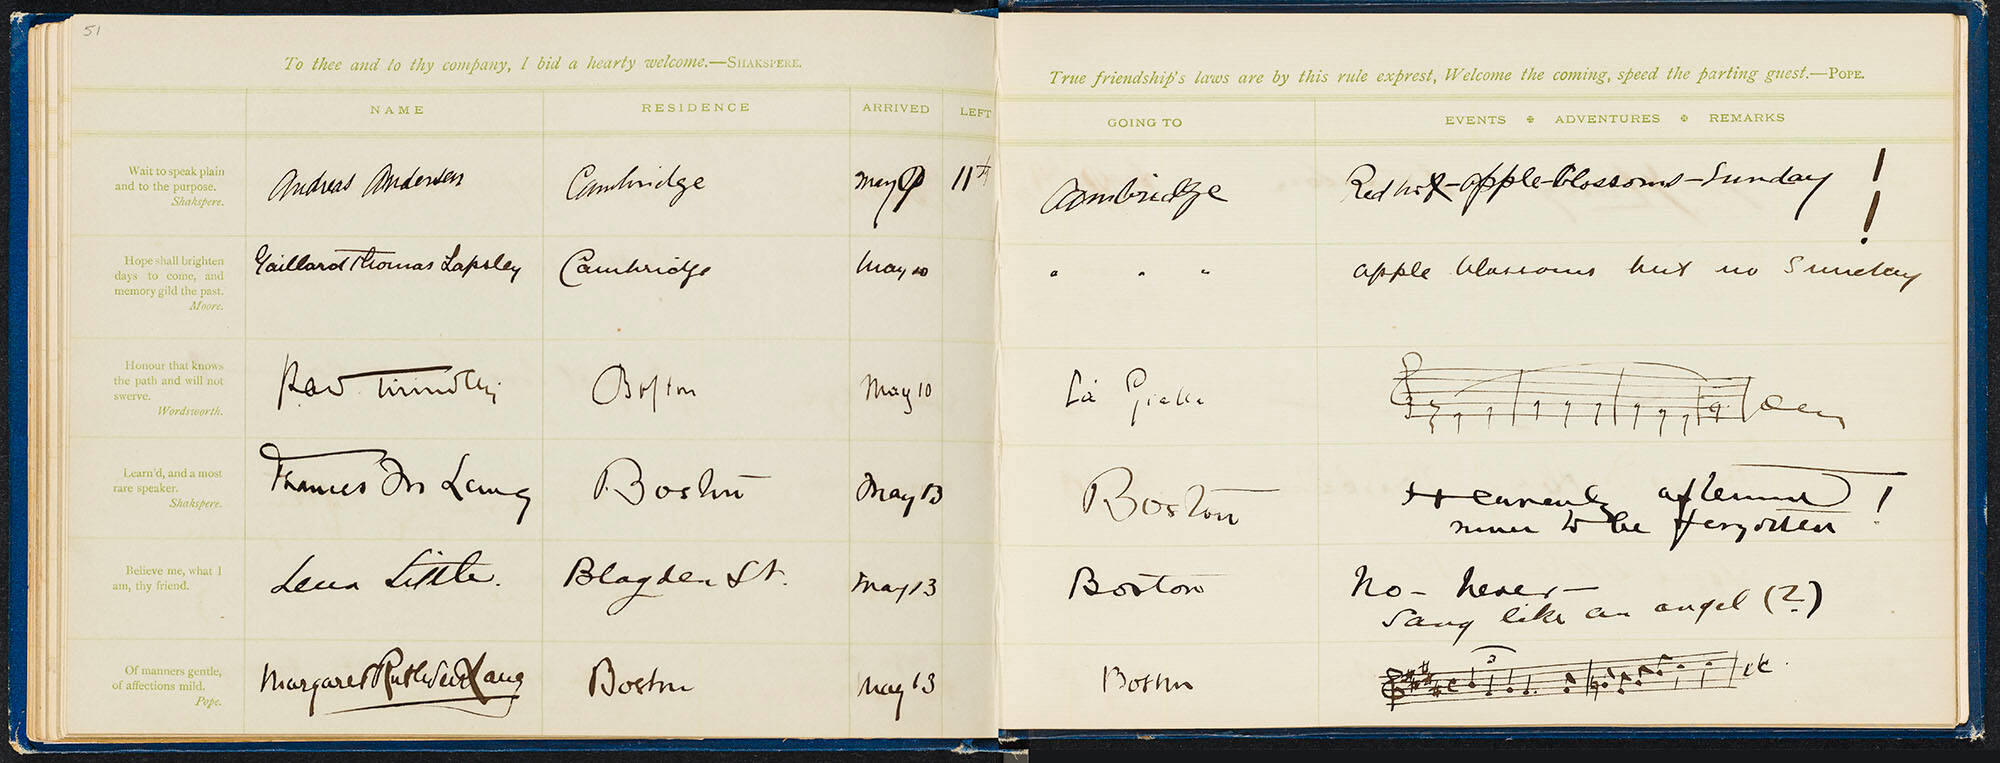 Pages of handwritten entries from Isabella’s guest book, including individuals’ names, residences, dates of the visit, next destination, and remarks. The bottom entry is the signature of Margaret Ruthven Lang with a bar of music.